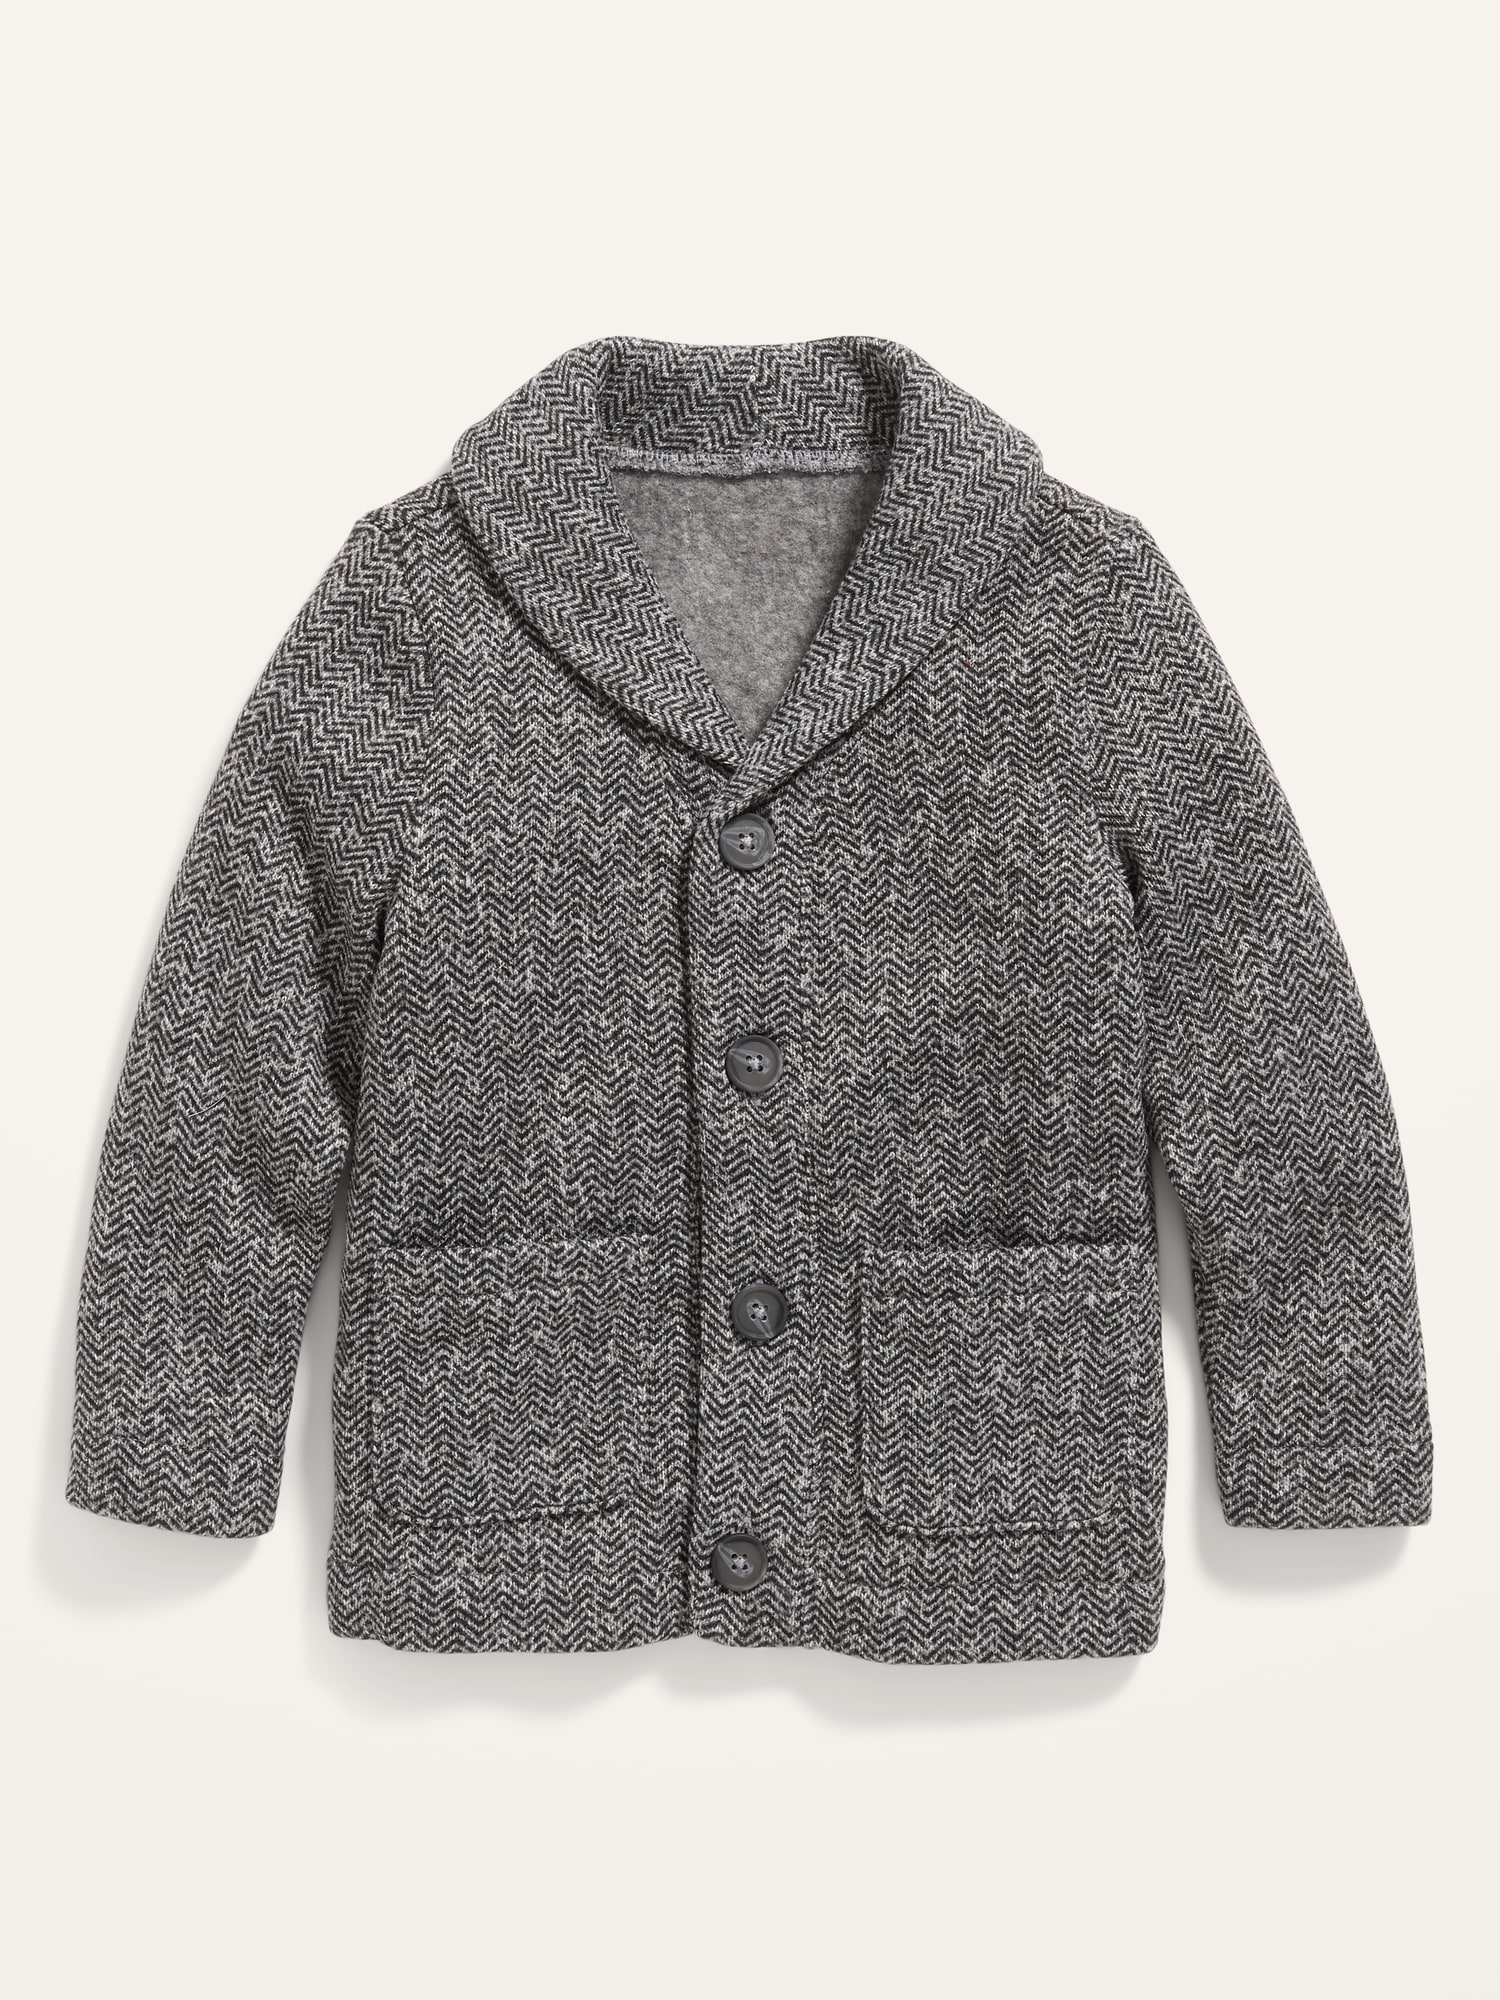 Sweater-Knit Shawl-Collar Cardigan for Toddler Boys | Old Navy